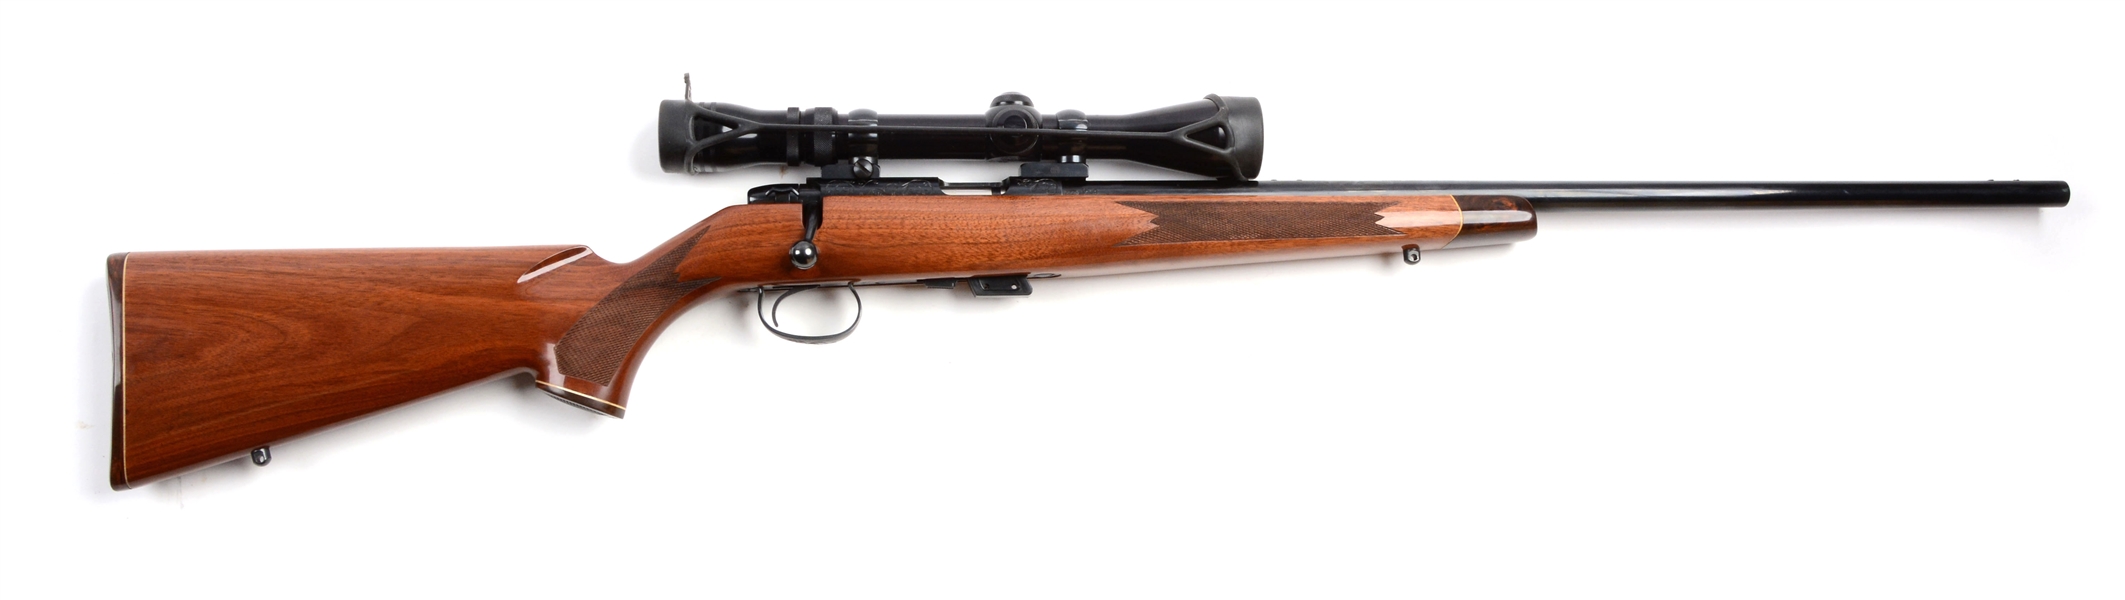 (M) BOXED REMINGTON MODEL 541-S BOLT ACTION SPORTING RIFLE.